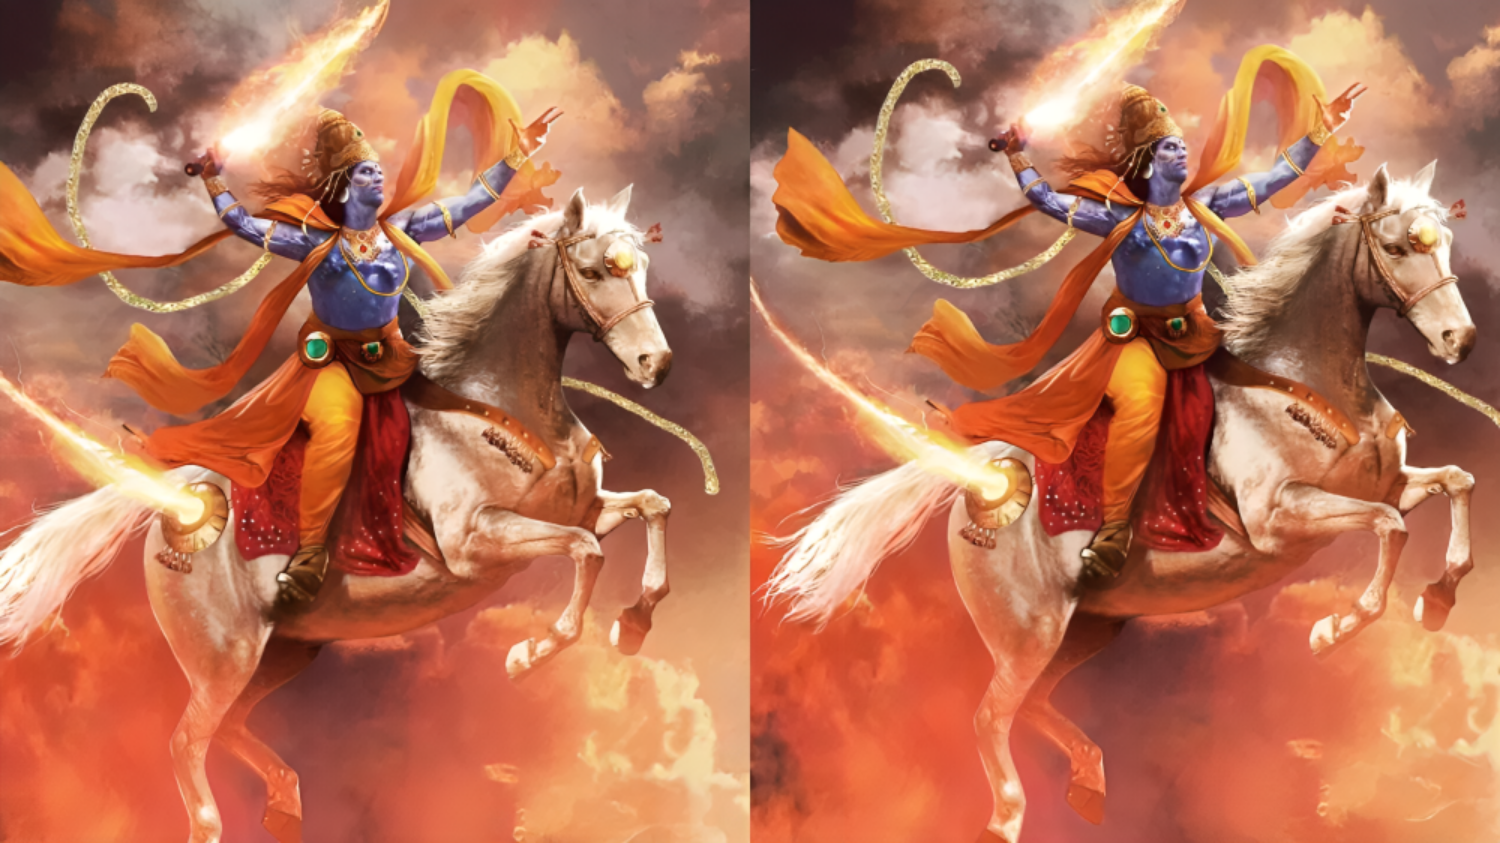 Picture of Shri Hari will take Kalki avatar, know where will he be born and what will be his form?